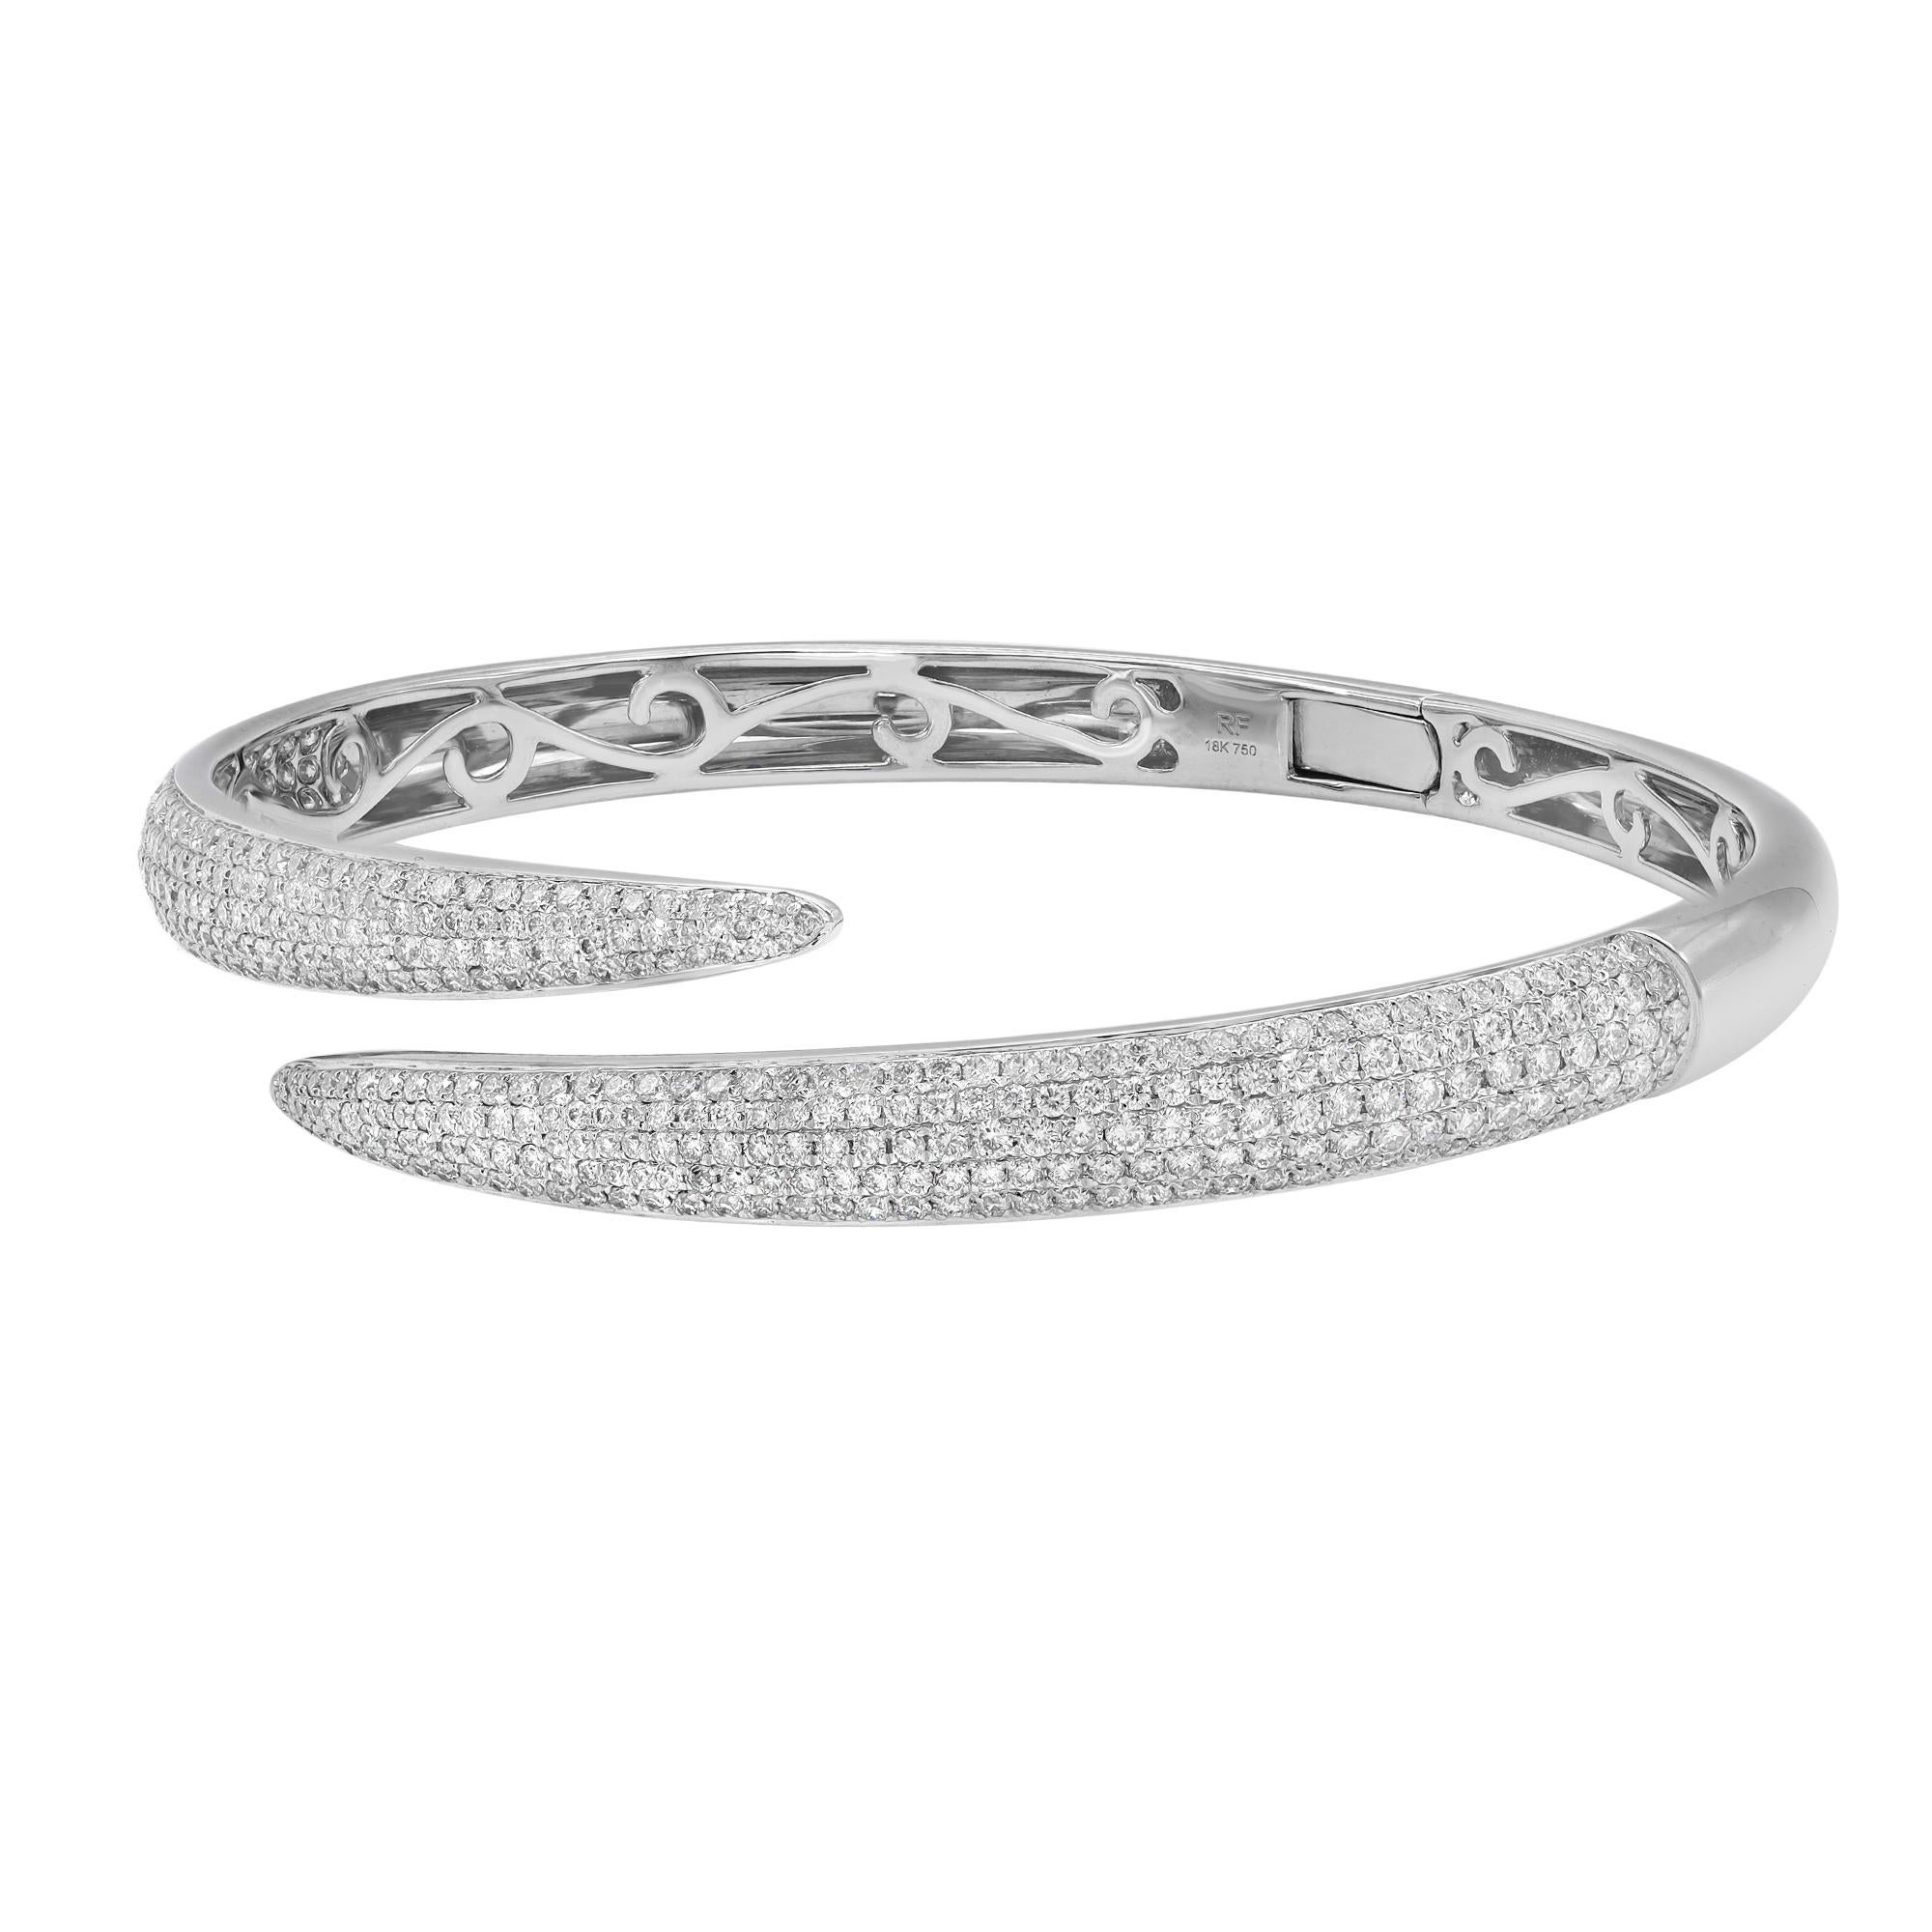 A classic look with easy elegance, this diamond bangle bracelet exudes sophistication. This stunning bracelet is crafted in 18k white gold and features pave set tiny white round cut diamonds with a total weight of 2.64 carats. Diamond color G-H and